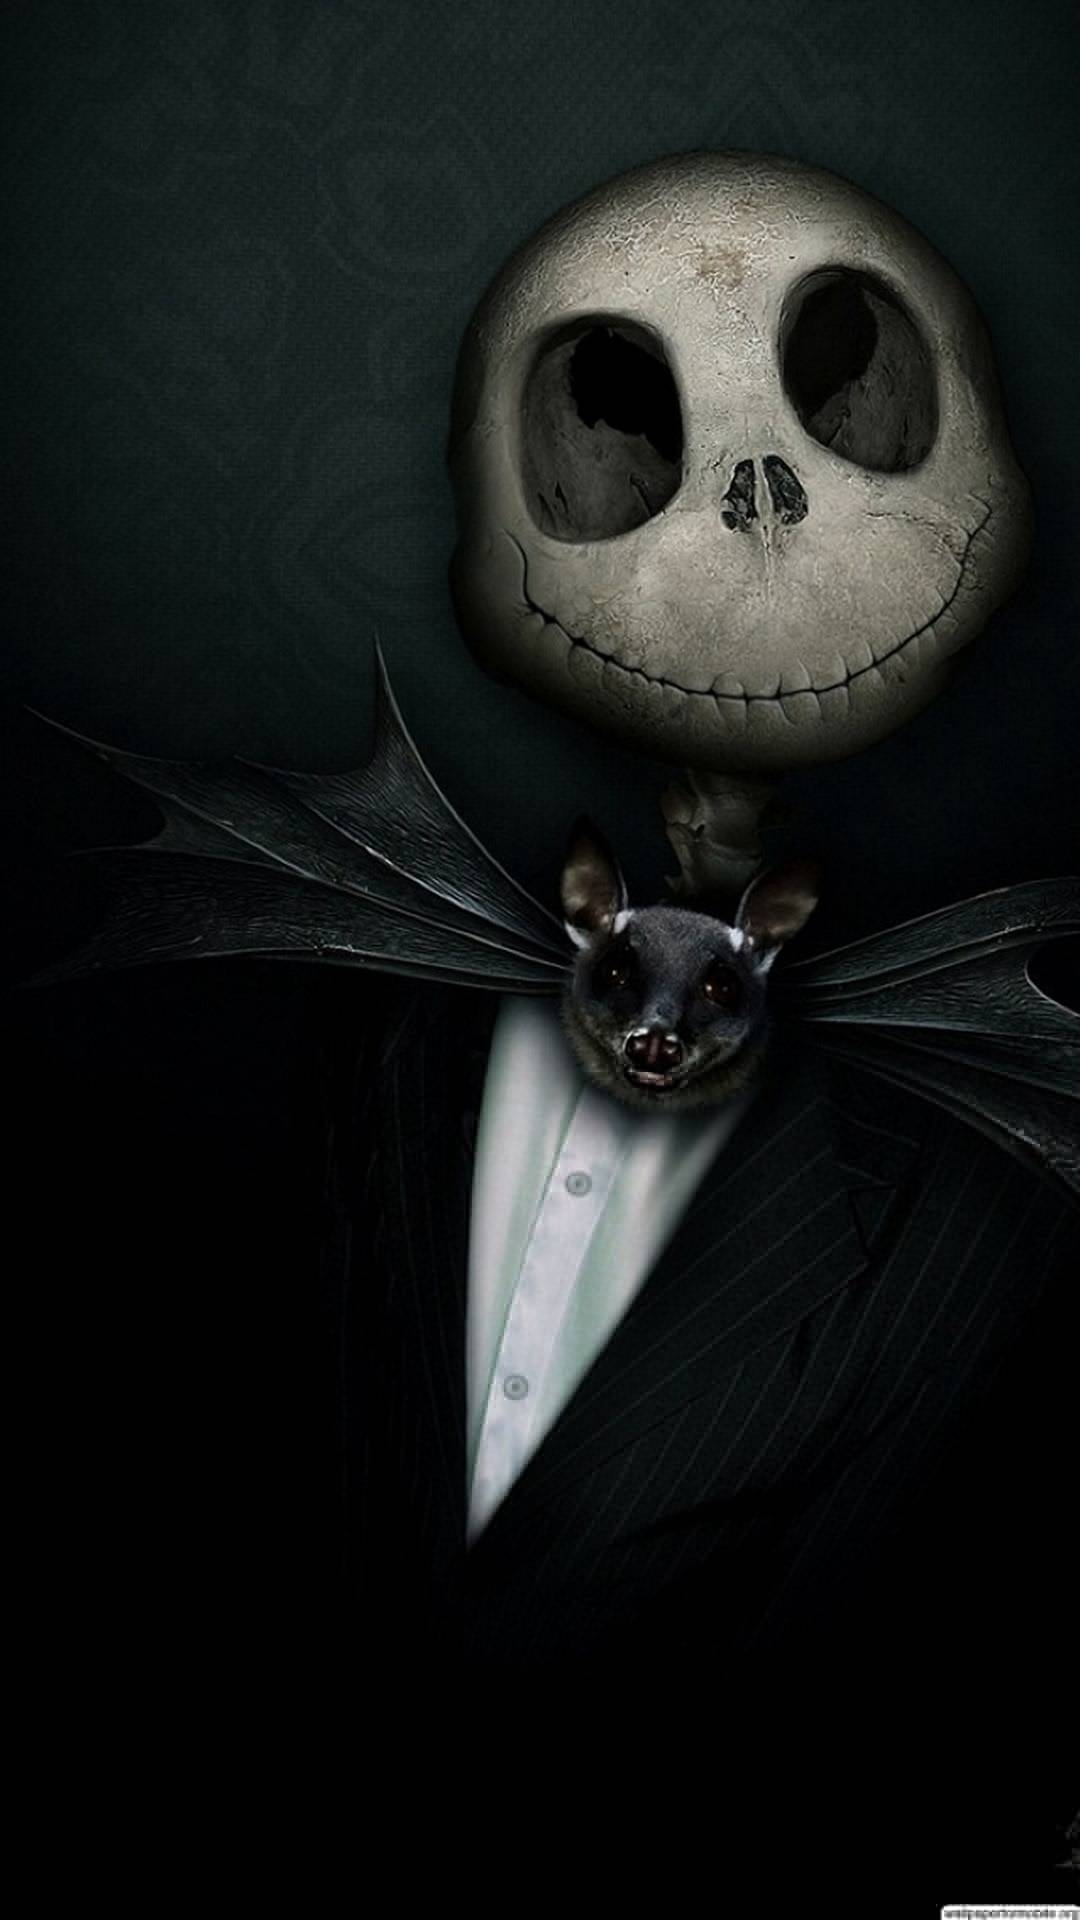 1080x1920 Nightmare Before Christmas Wallpaper For iPhone. Wallpaper